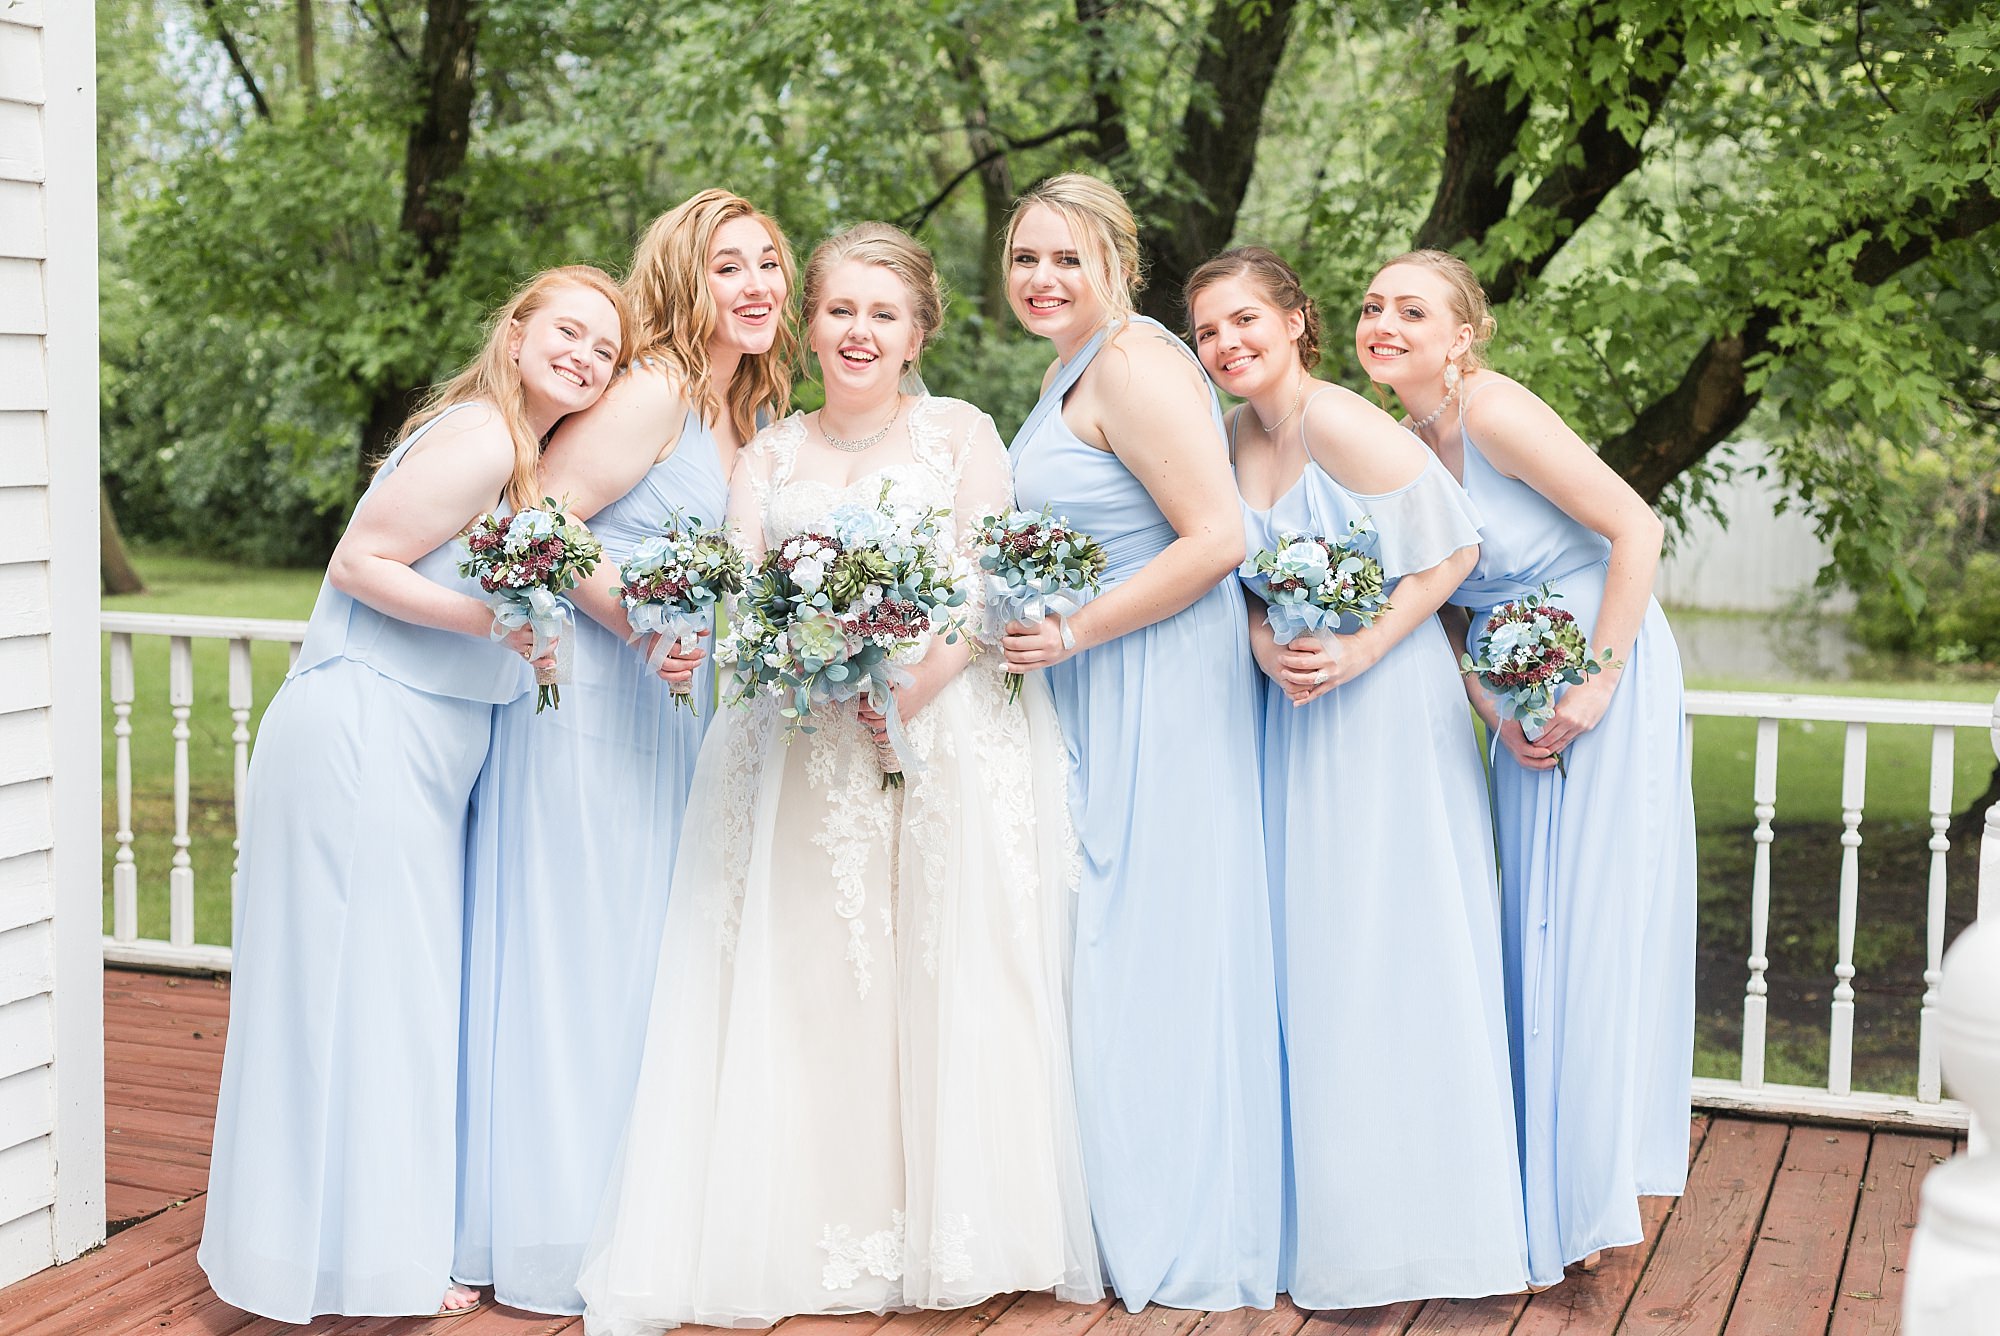 Bridesmaids in light blue surround a bride in a lace dress